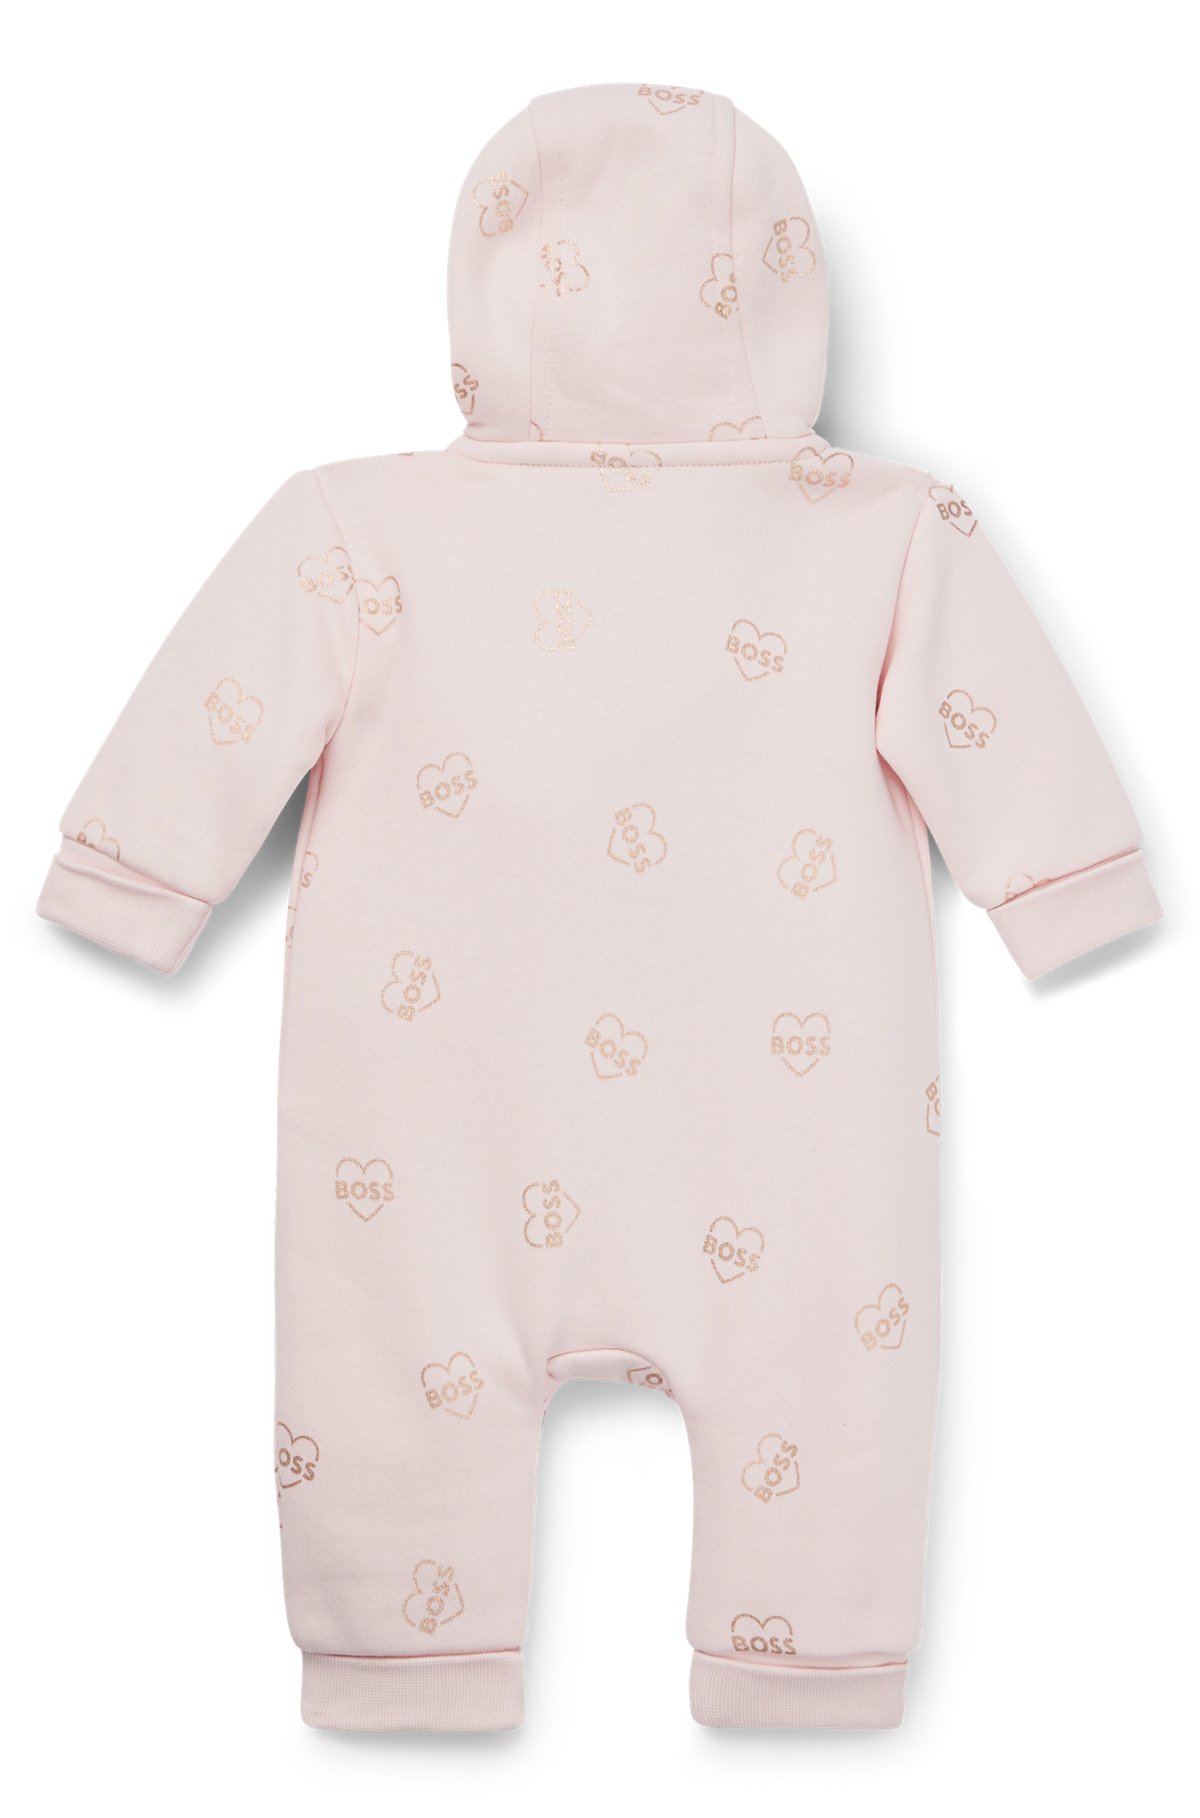 Baby hooded all-in-one in logo-print fleece, light pink